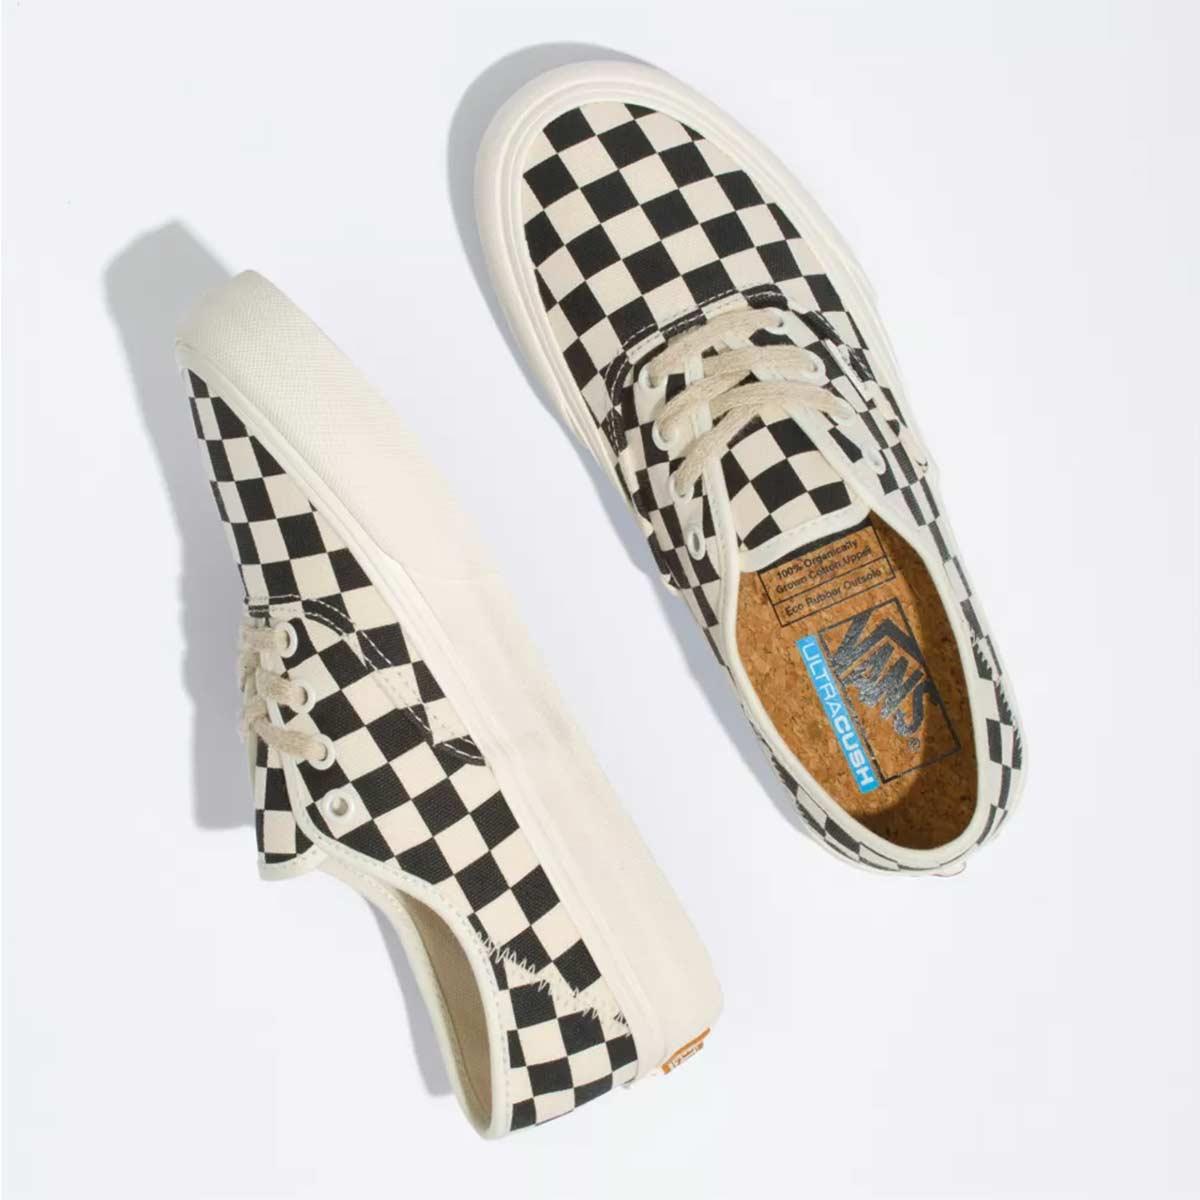 Vans Eco Theory Authentic SF Skate Shoes, Black Checkerboard/Marshmallow